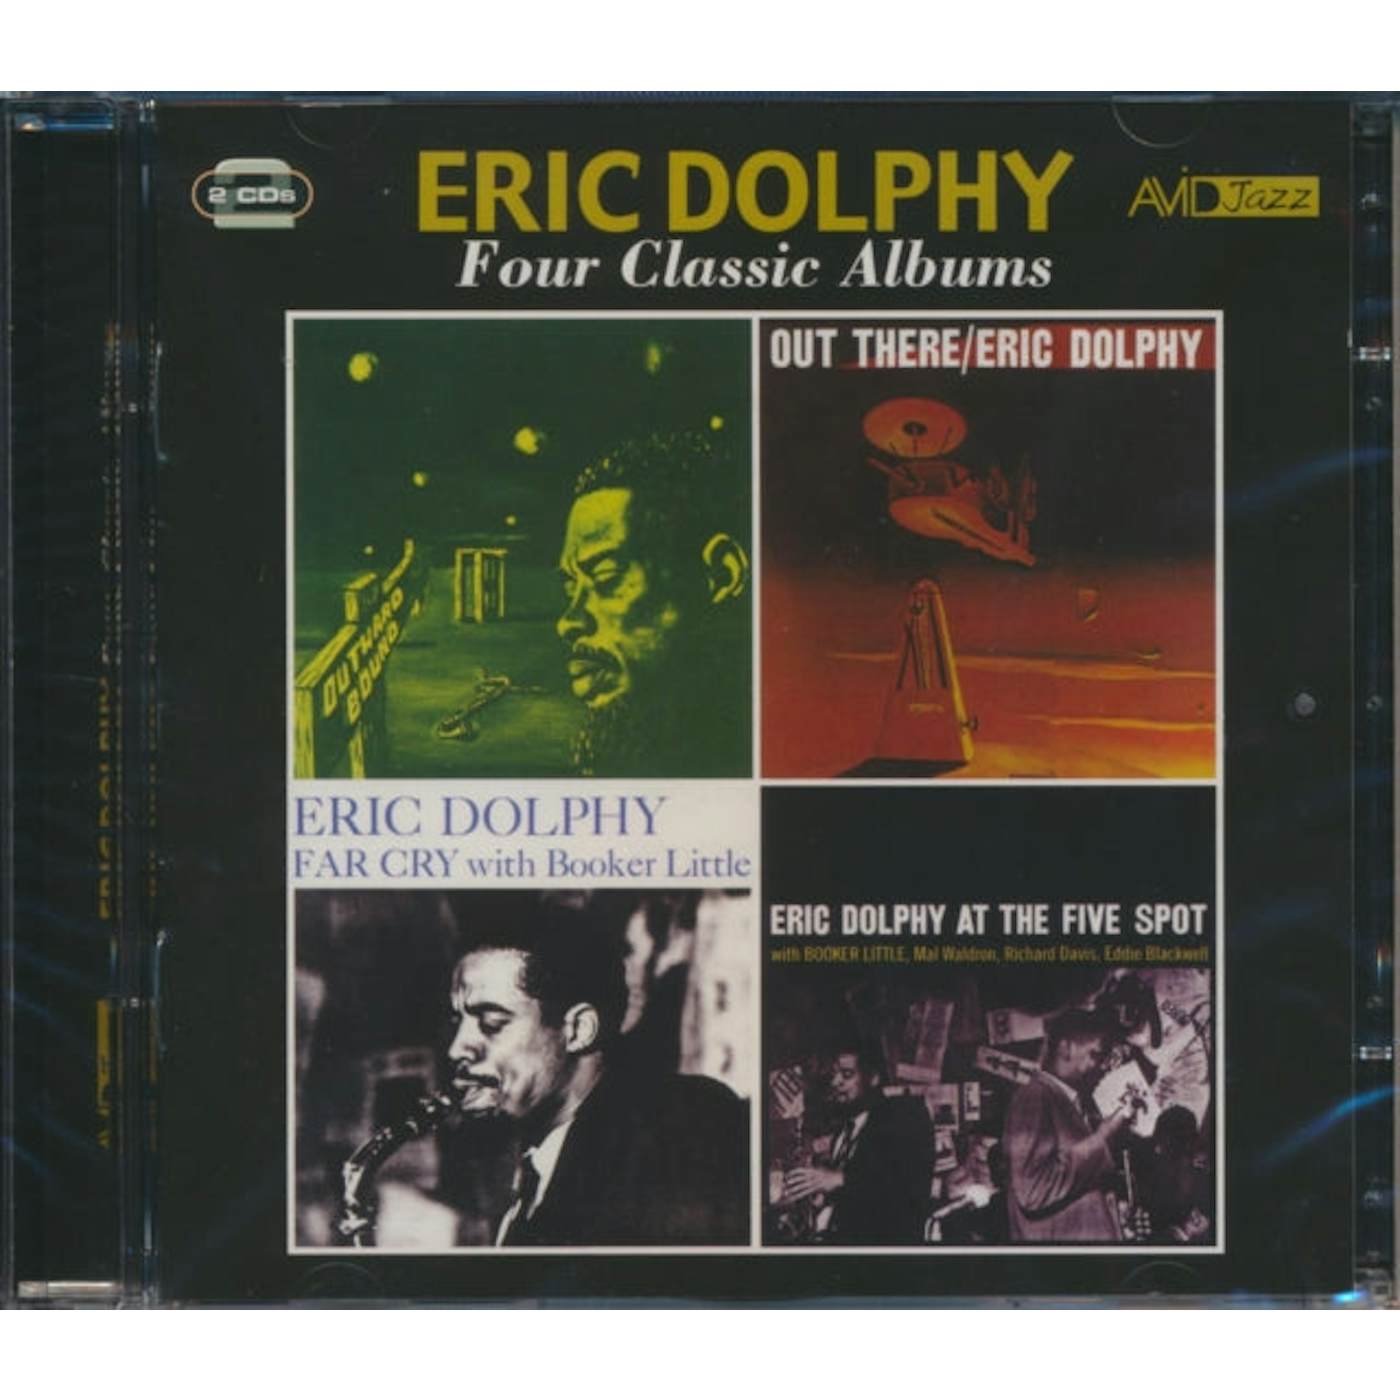 Eric Dolphy CD - Four Classic Albums (Outward Bound / Out There / Far Cry / Eric Dolphy At The Five Spot)